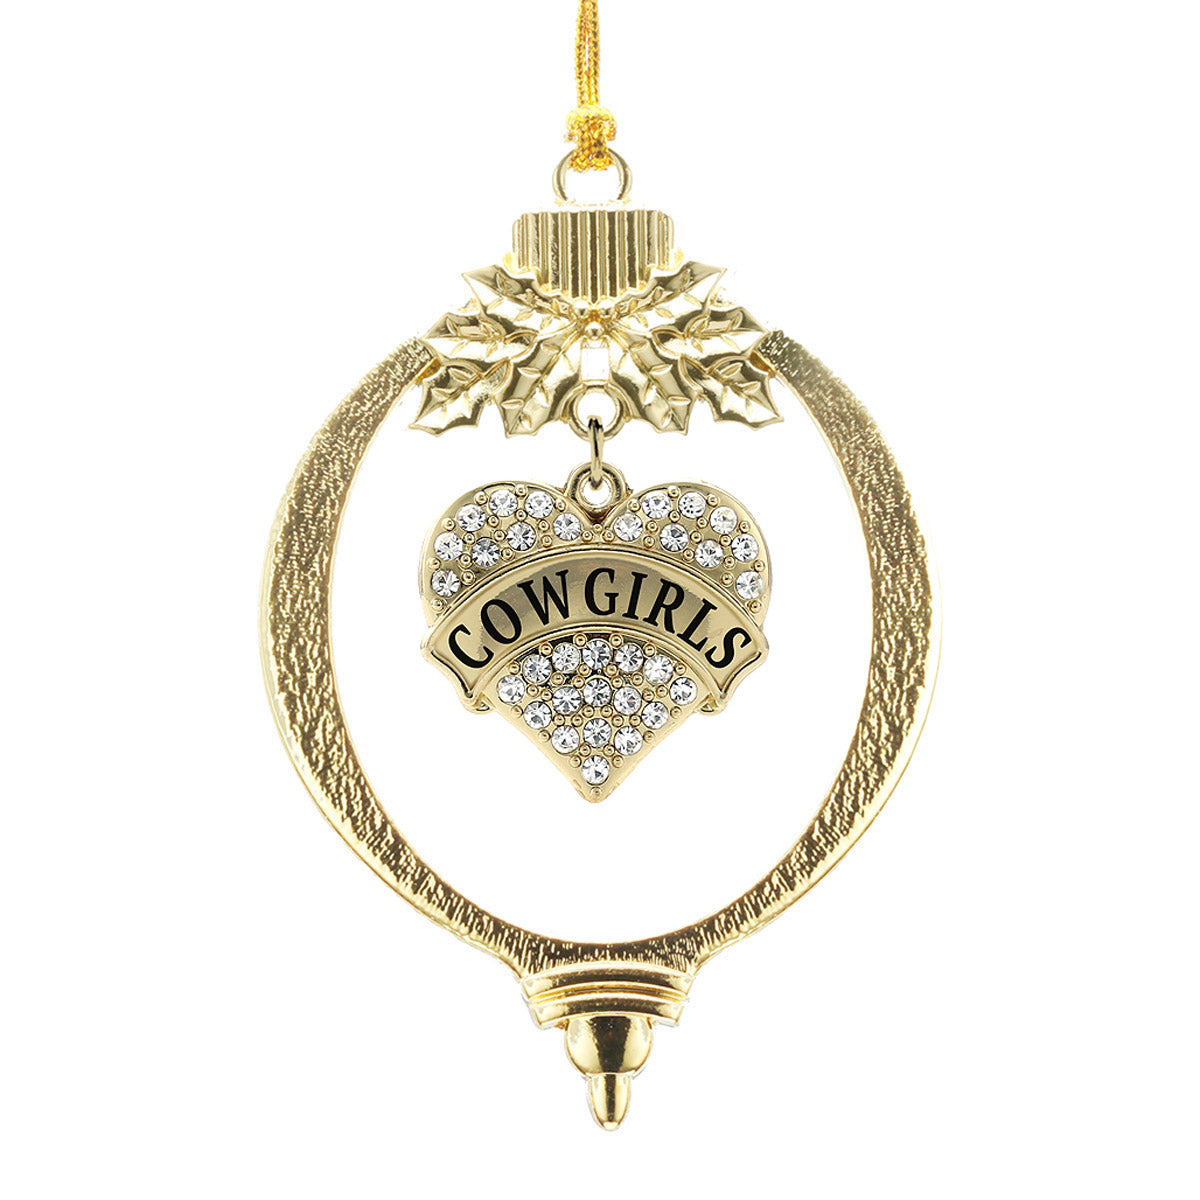 Gold Cowgirls Pave Heart Charm Holiday Ornament